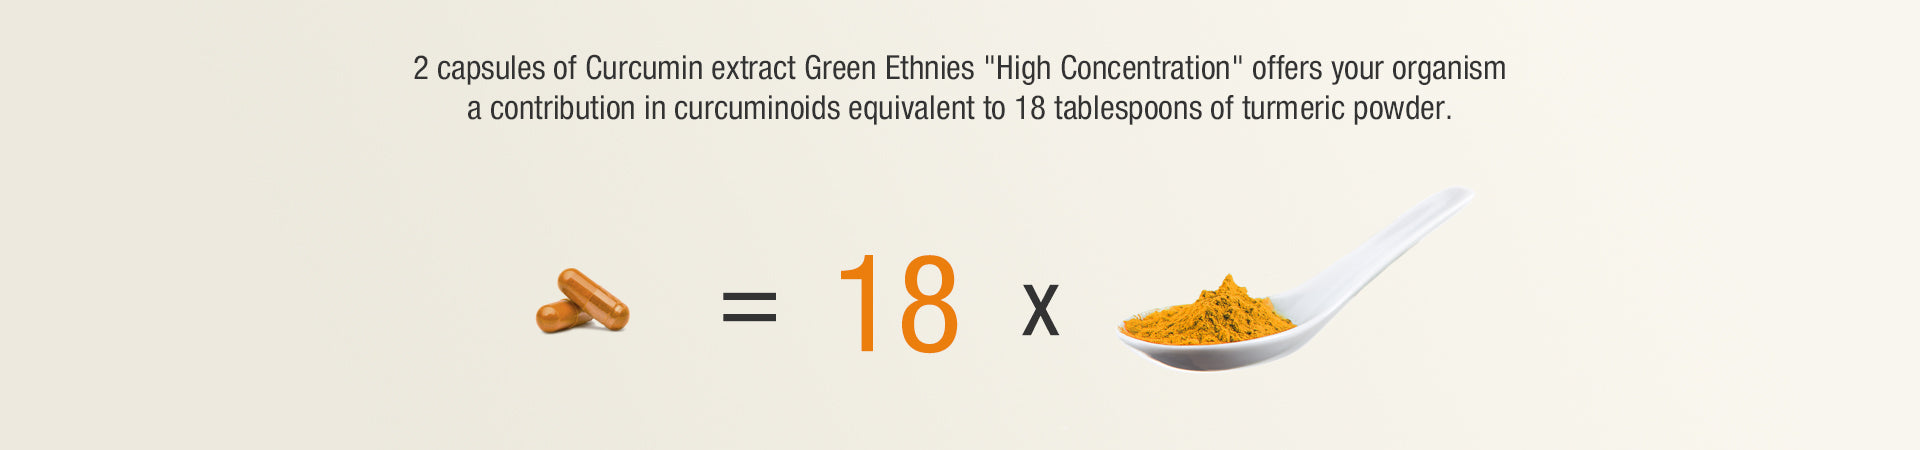 Organic Curcumin natural concentrated extract quality